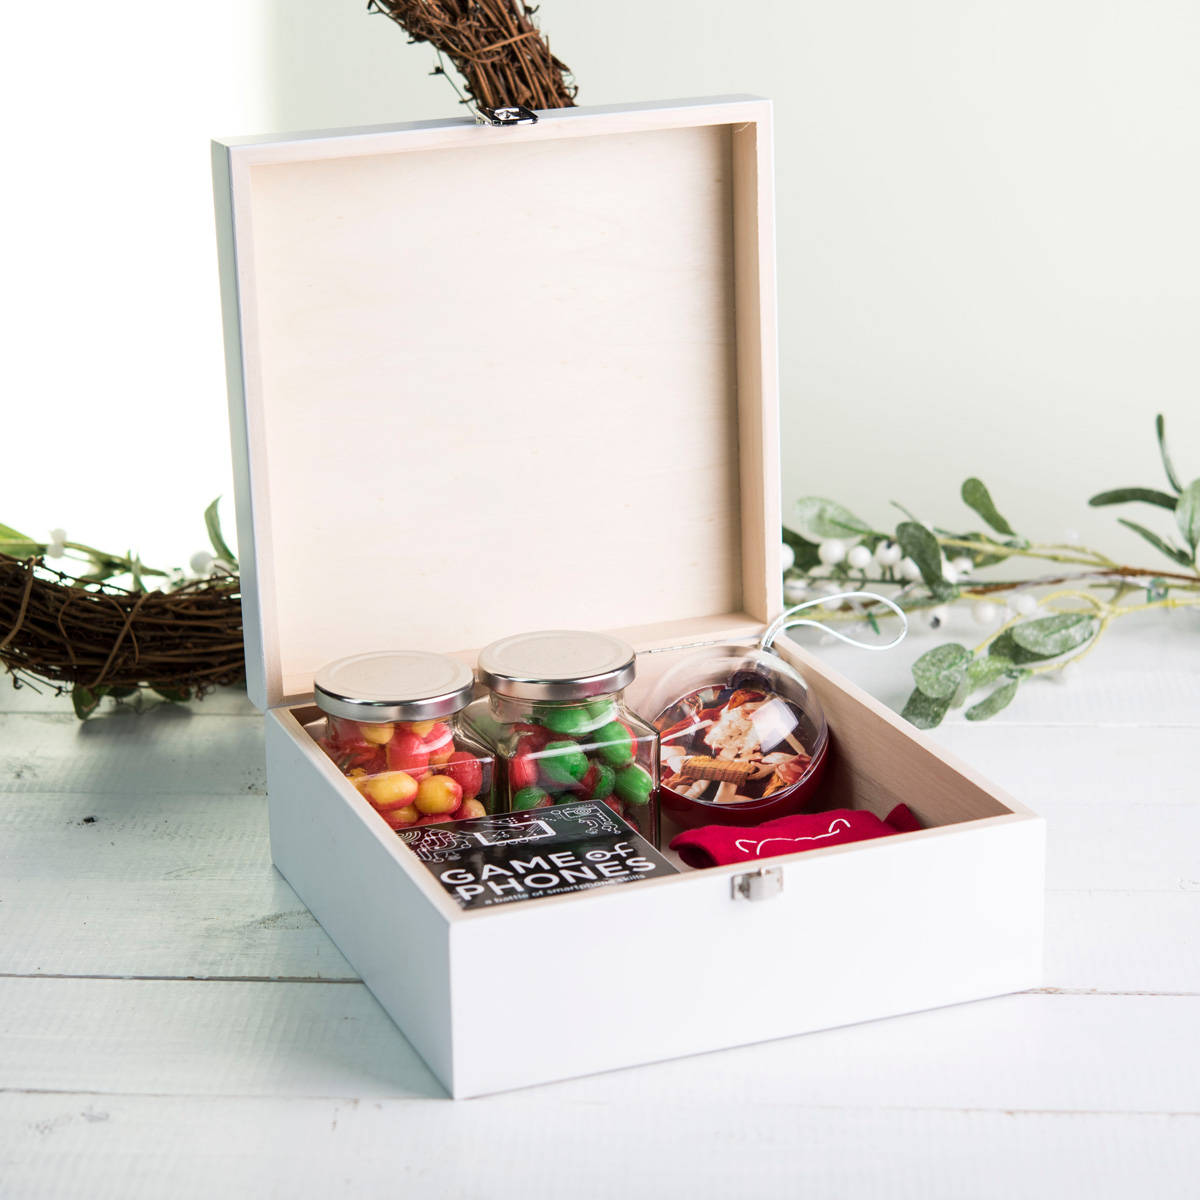 Personalised Christmas Eve Box - Special Delivery